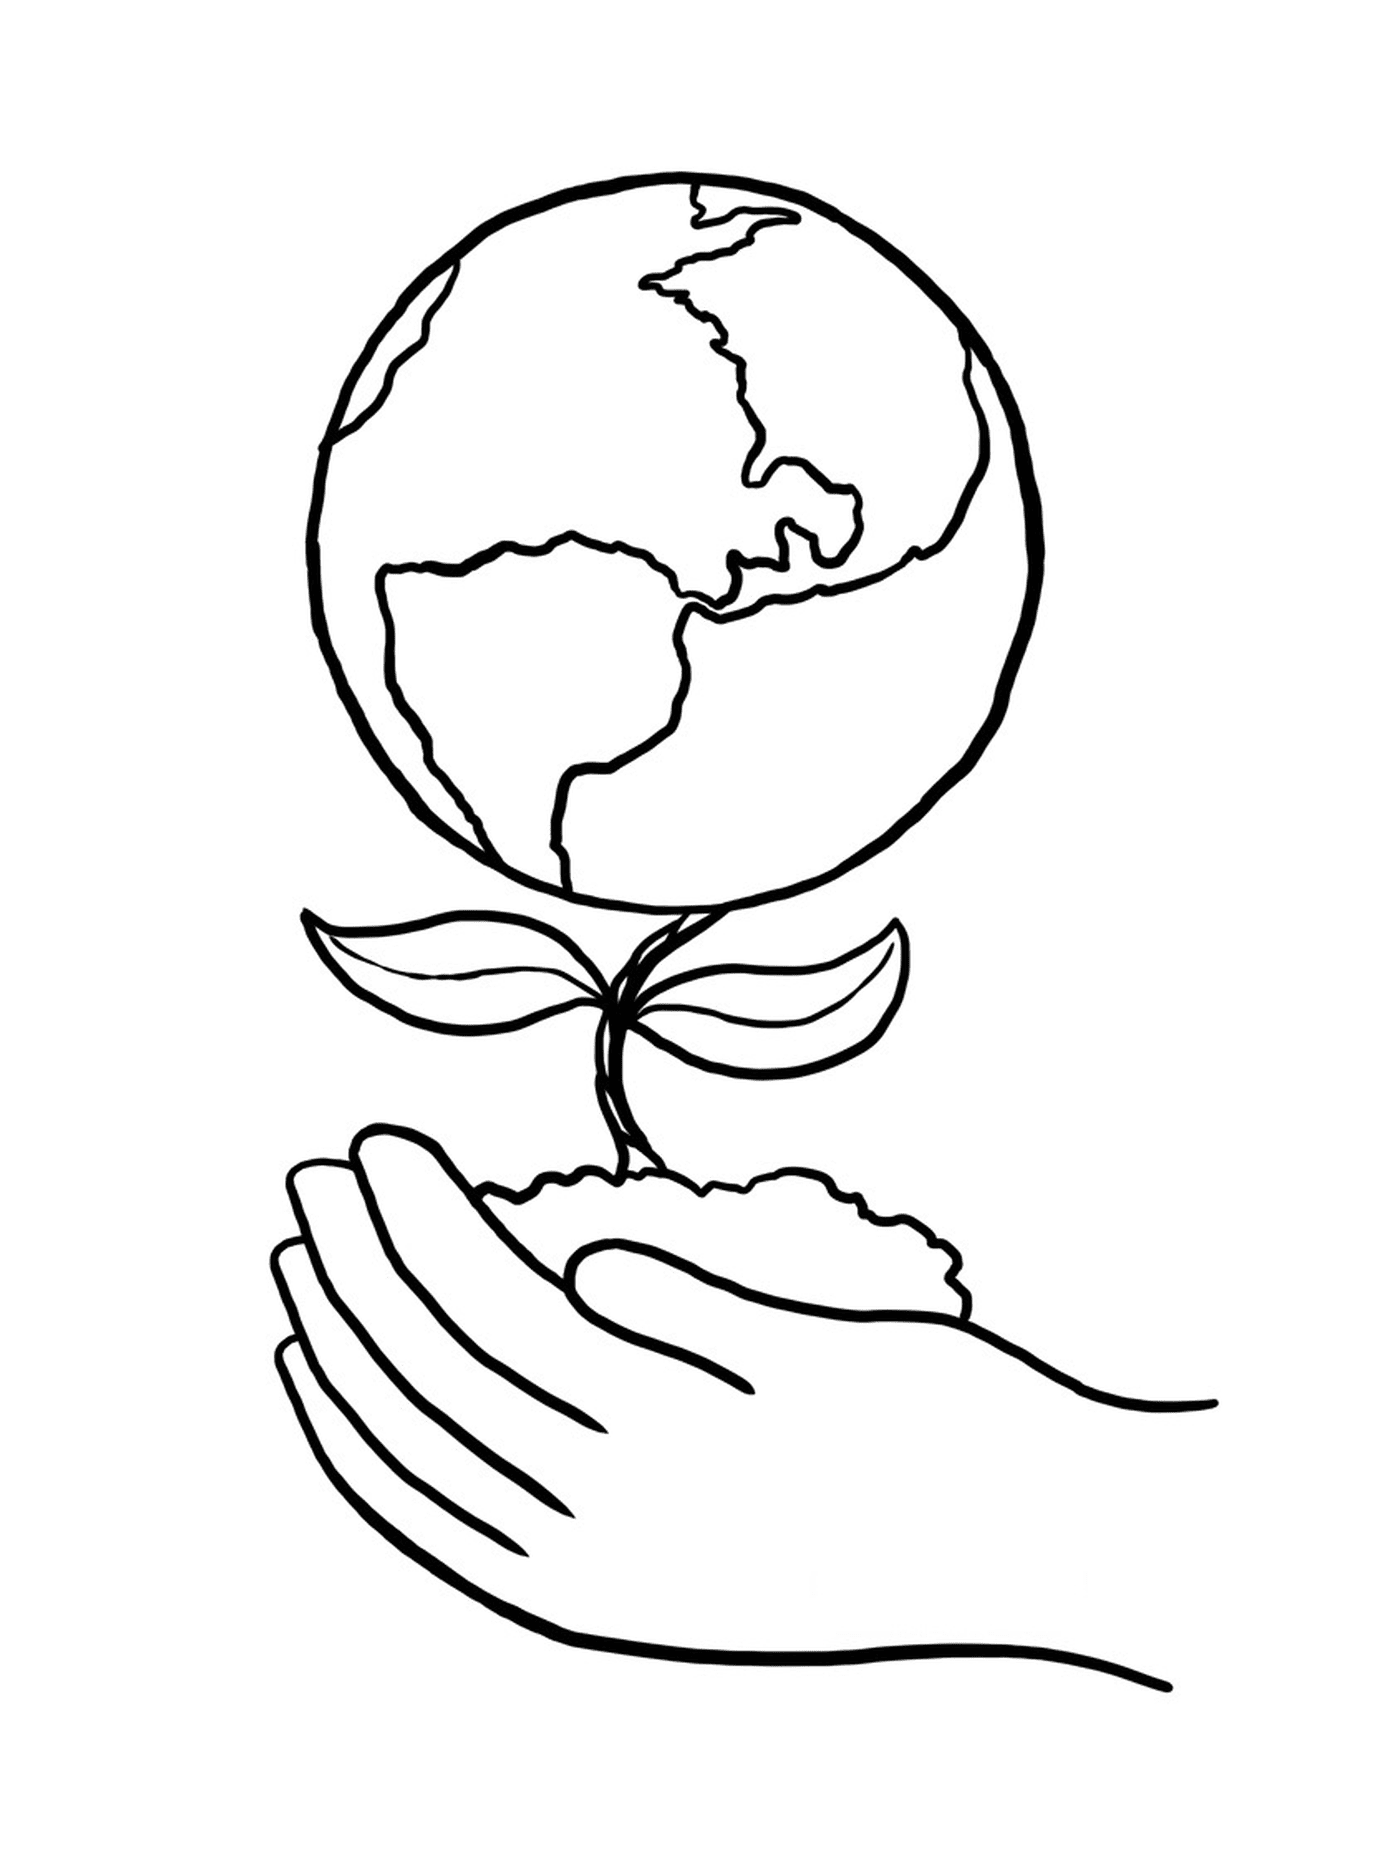  Plant in one hand, Earth in the foreground 